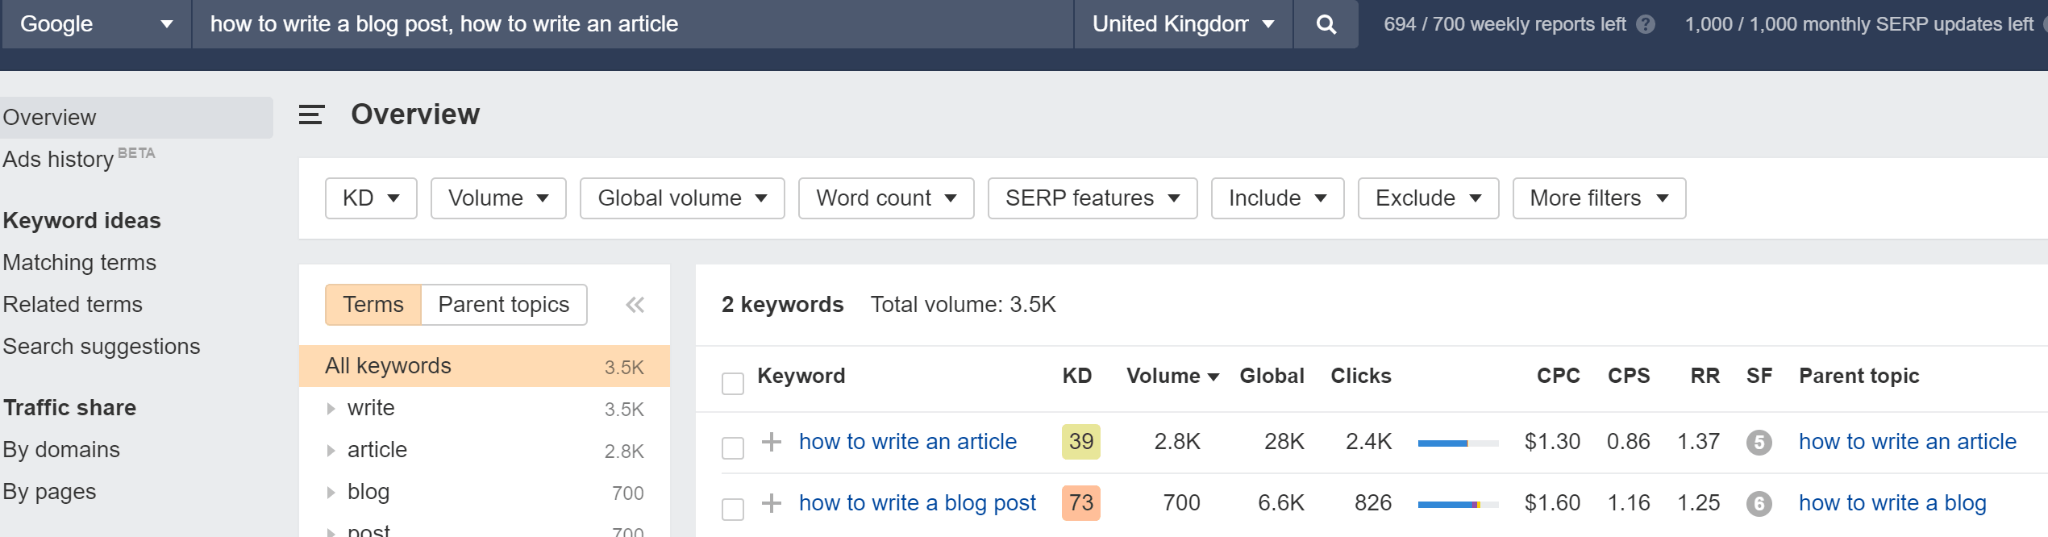 ‘How to write an article’ has a ‘keyword difficulty score’ of 39, and an estimated global search traffic of 26k searches per month. In contrast, ‘How to write a blog post’ has a ‘keyword difficulty score’ of 73, and yet far less searches at just 6,600 per month